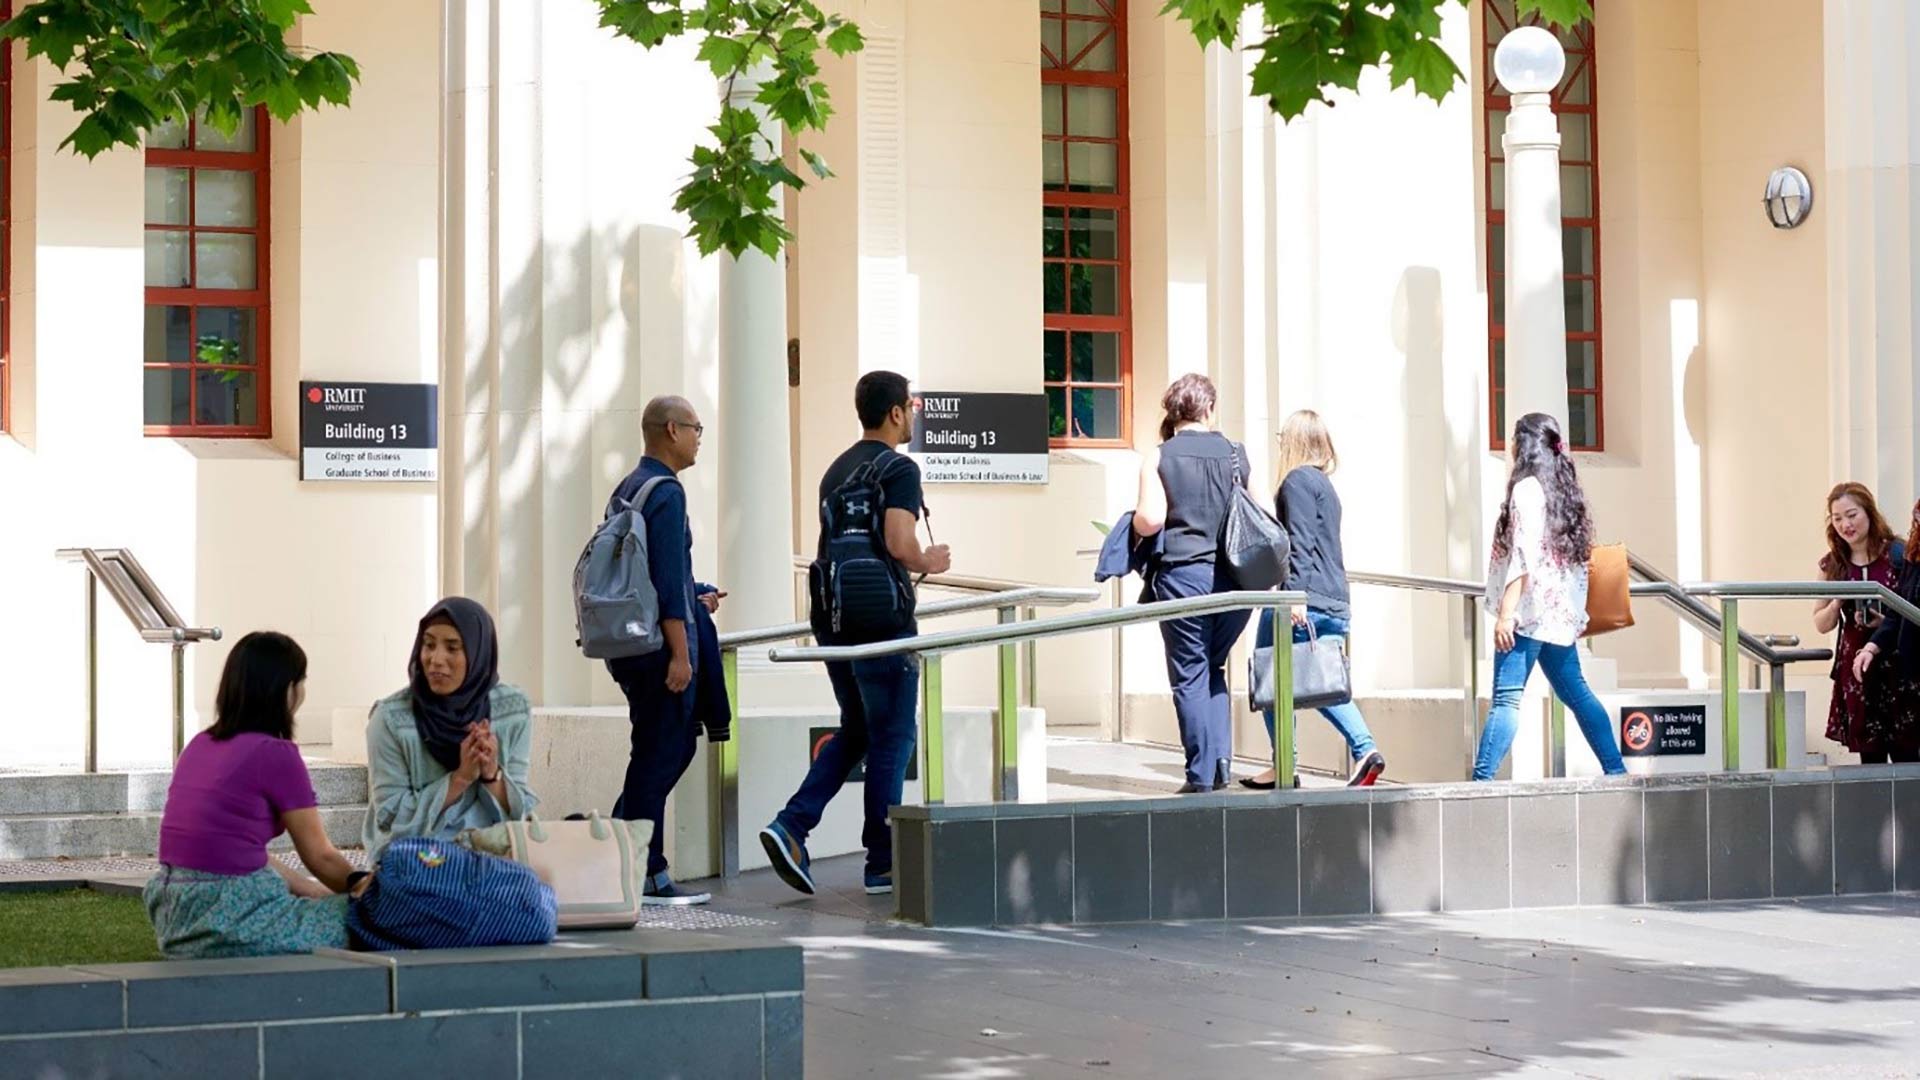 Students outside RMIT Building 13